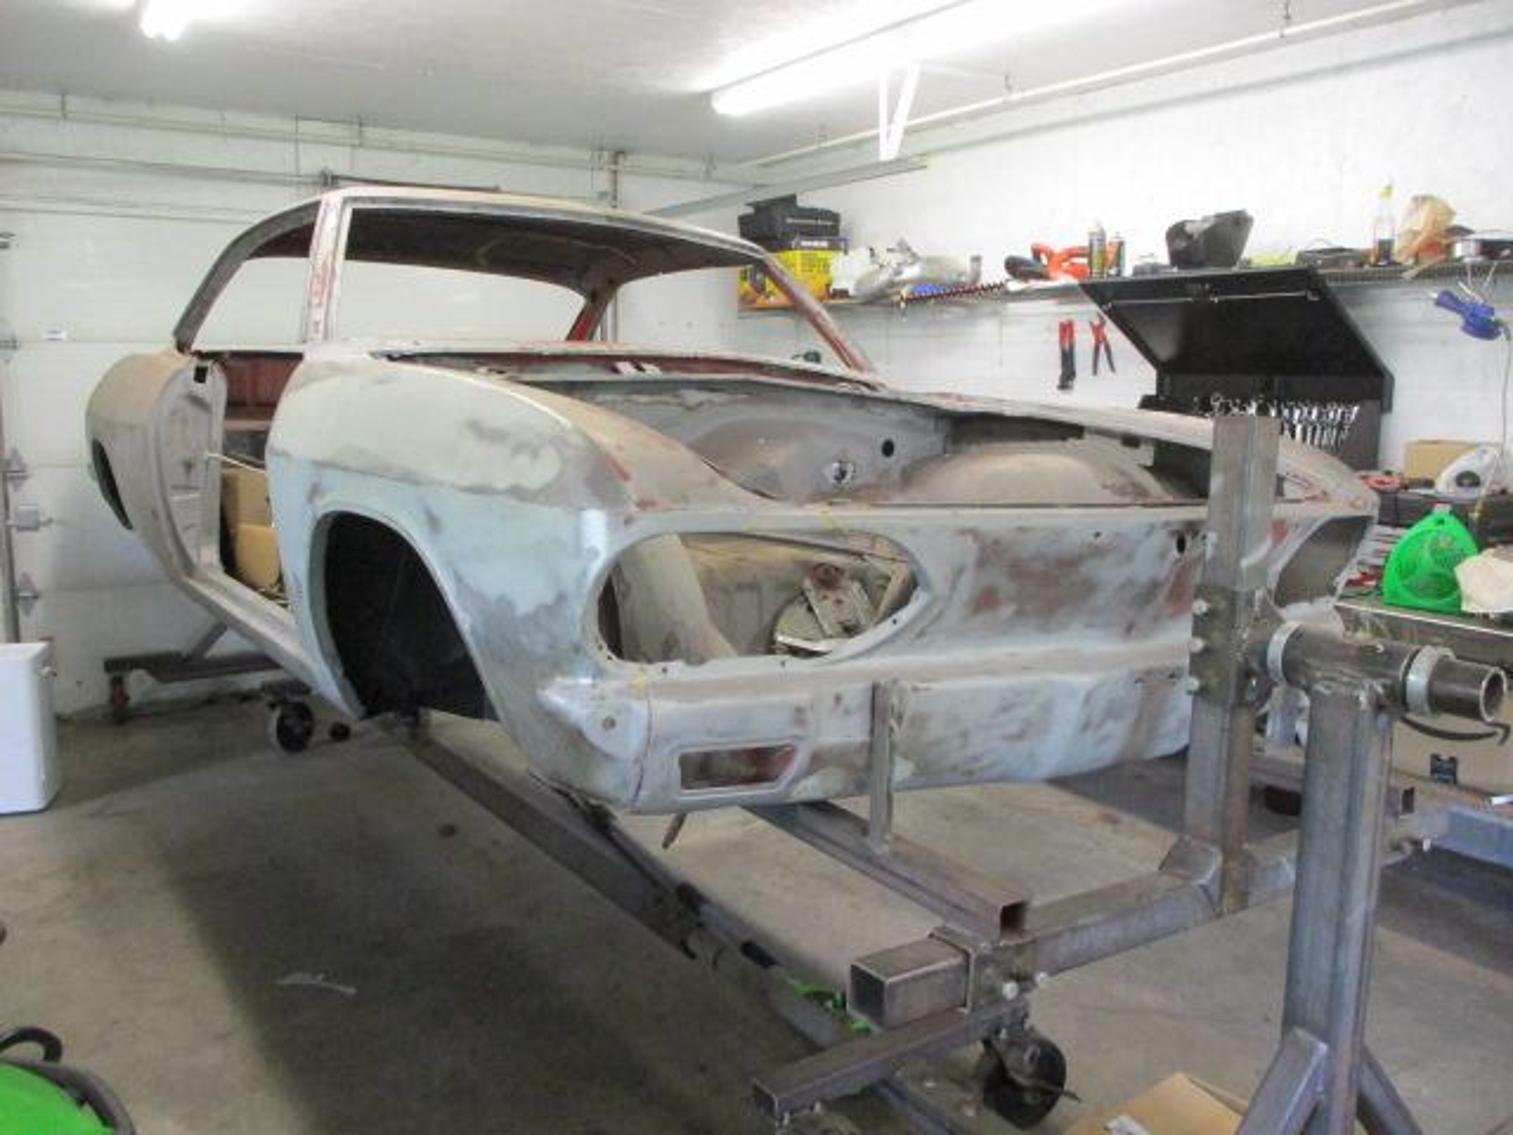 (2) 1966 Corvair Project Cars Opportunity With Car Rotisserie